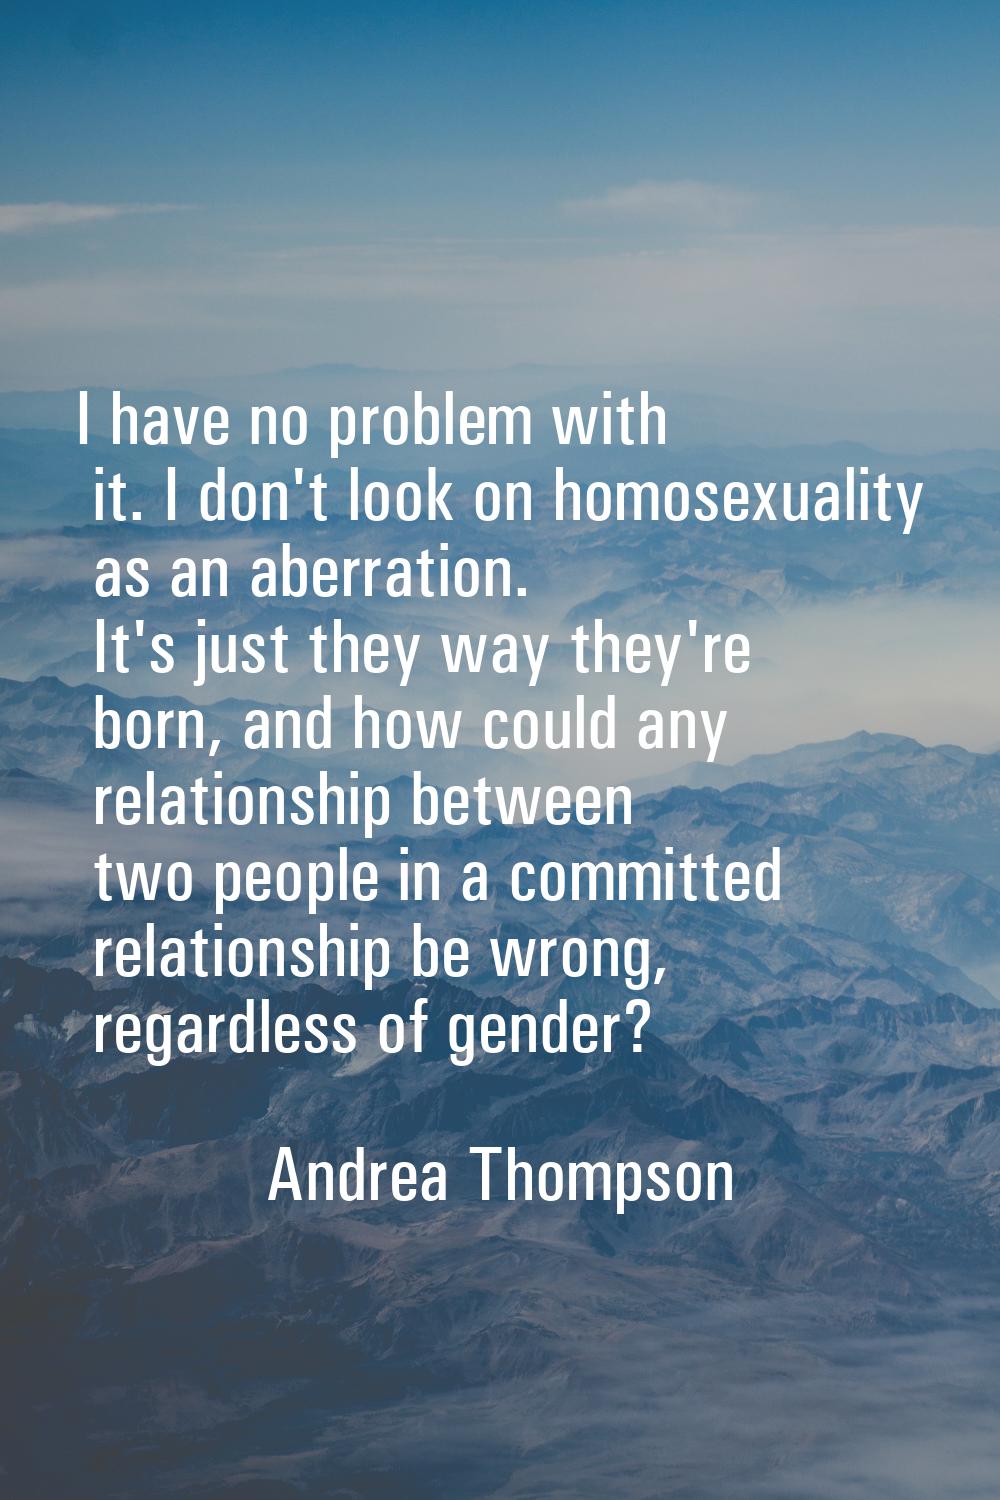 I have no problem with it. I don't look on homosexuality as an aberration. It's just they way they'